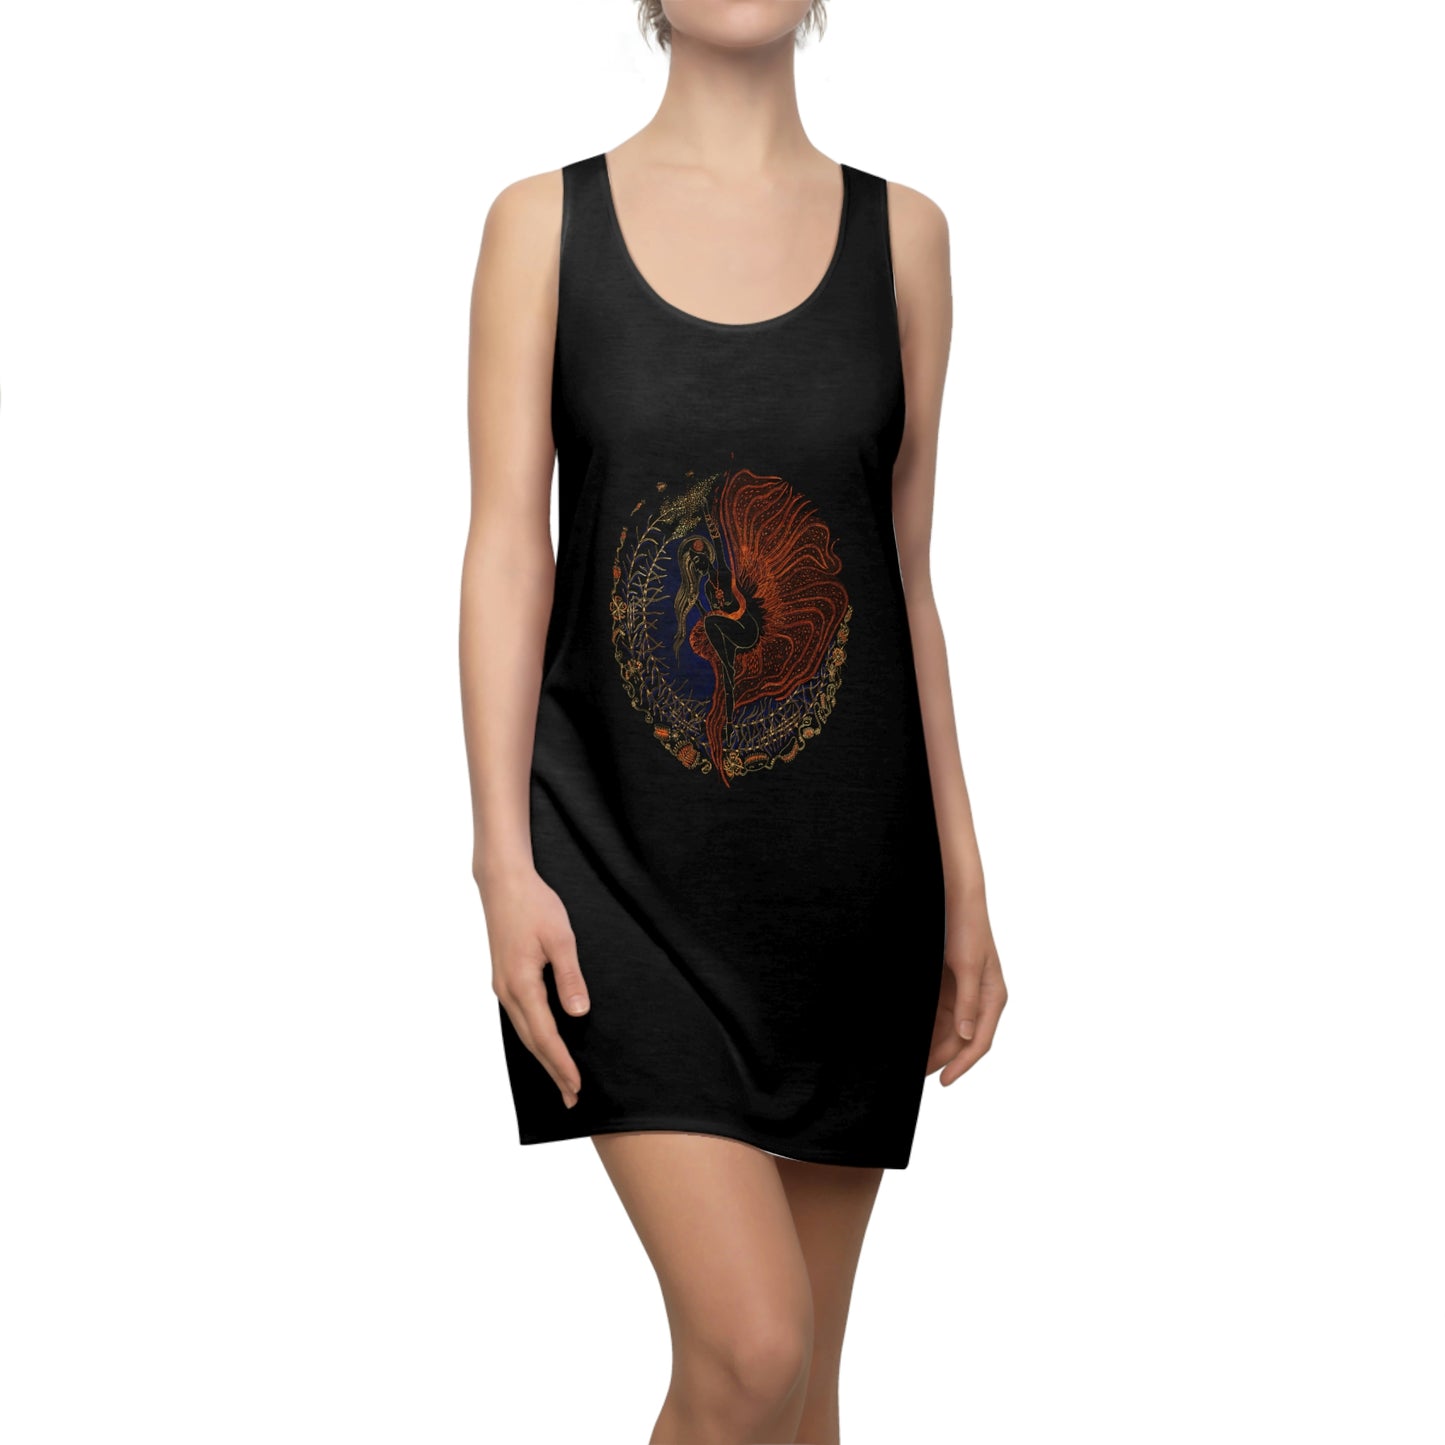 Chinese Zodiac Sign Dress (Rooster)